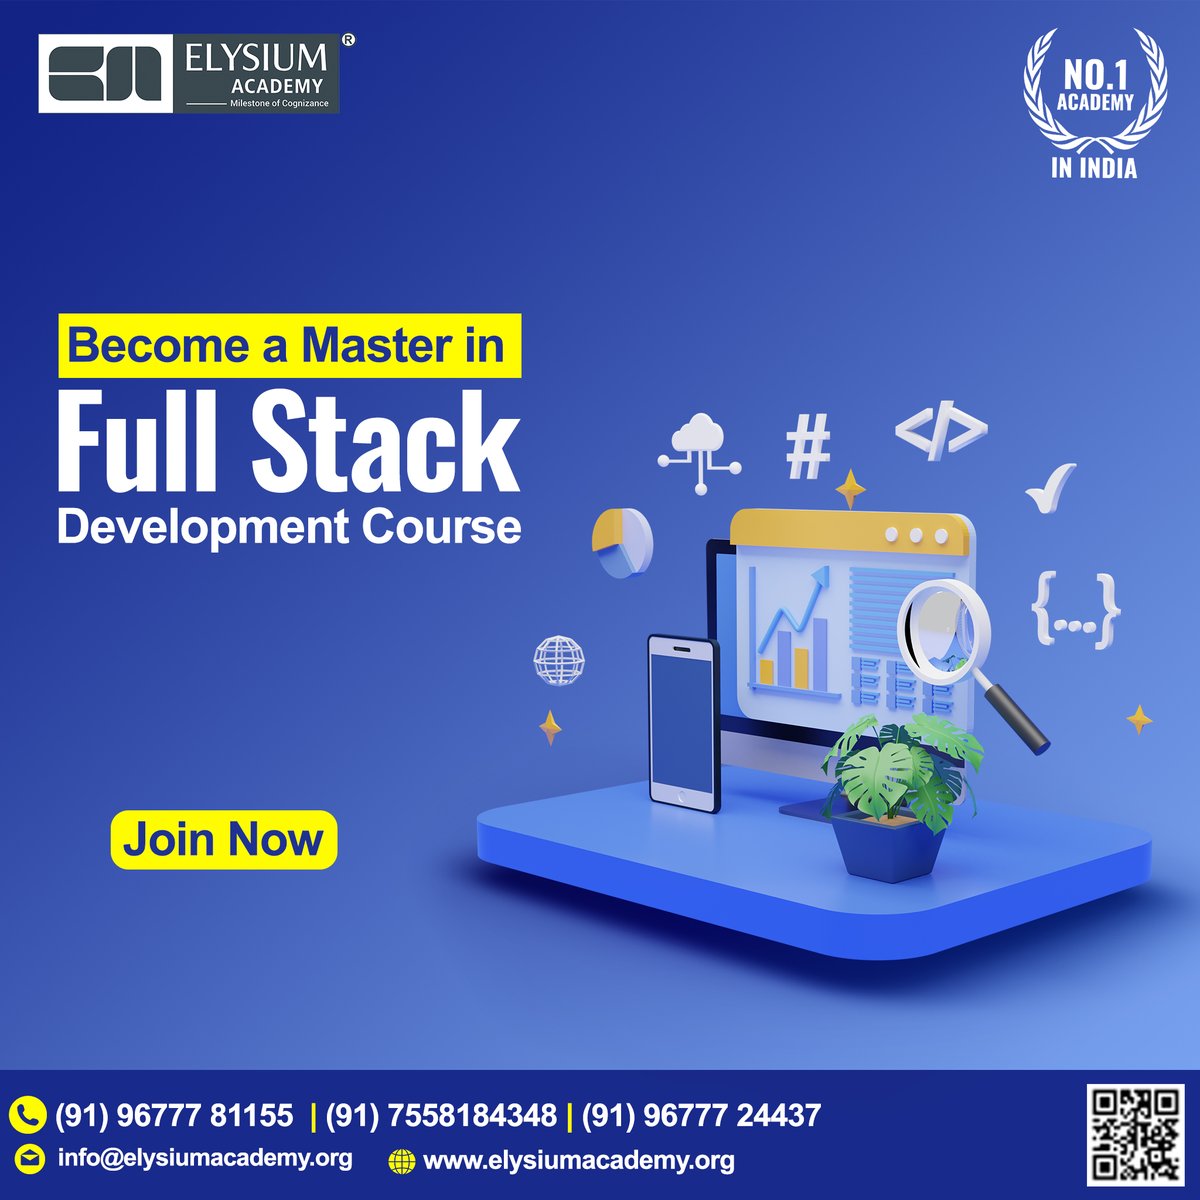 Change Your DREAM💭 to REALITY🧑‍💻 Become a #FullStackDeveloper #elysiumacademy #no1academy #tesbocourse #jobassurane #itcareer #it #itjobs #coding #job #technology #informationtechnology #programming #cloudcomputing #networkengineer #programmer #techjobs #networksecurity